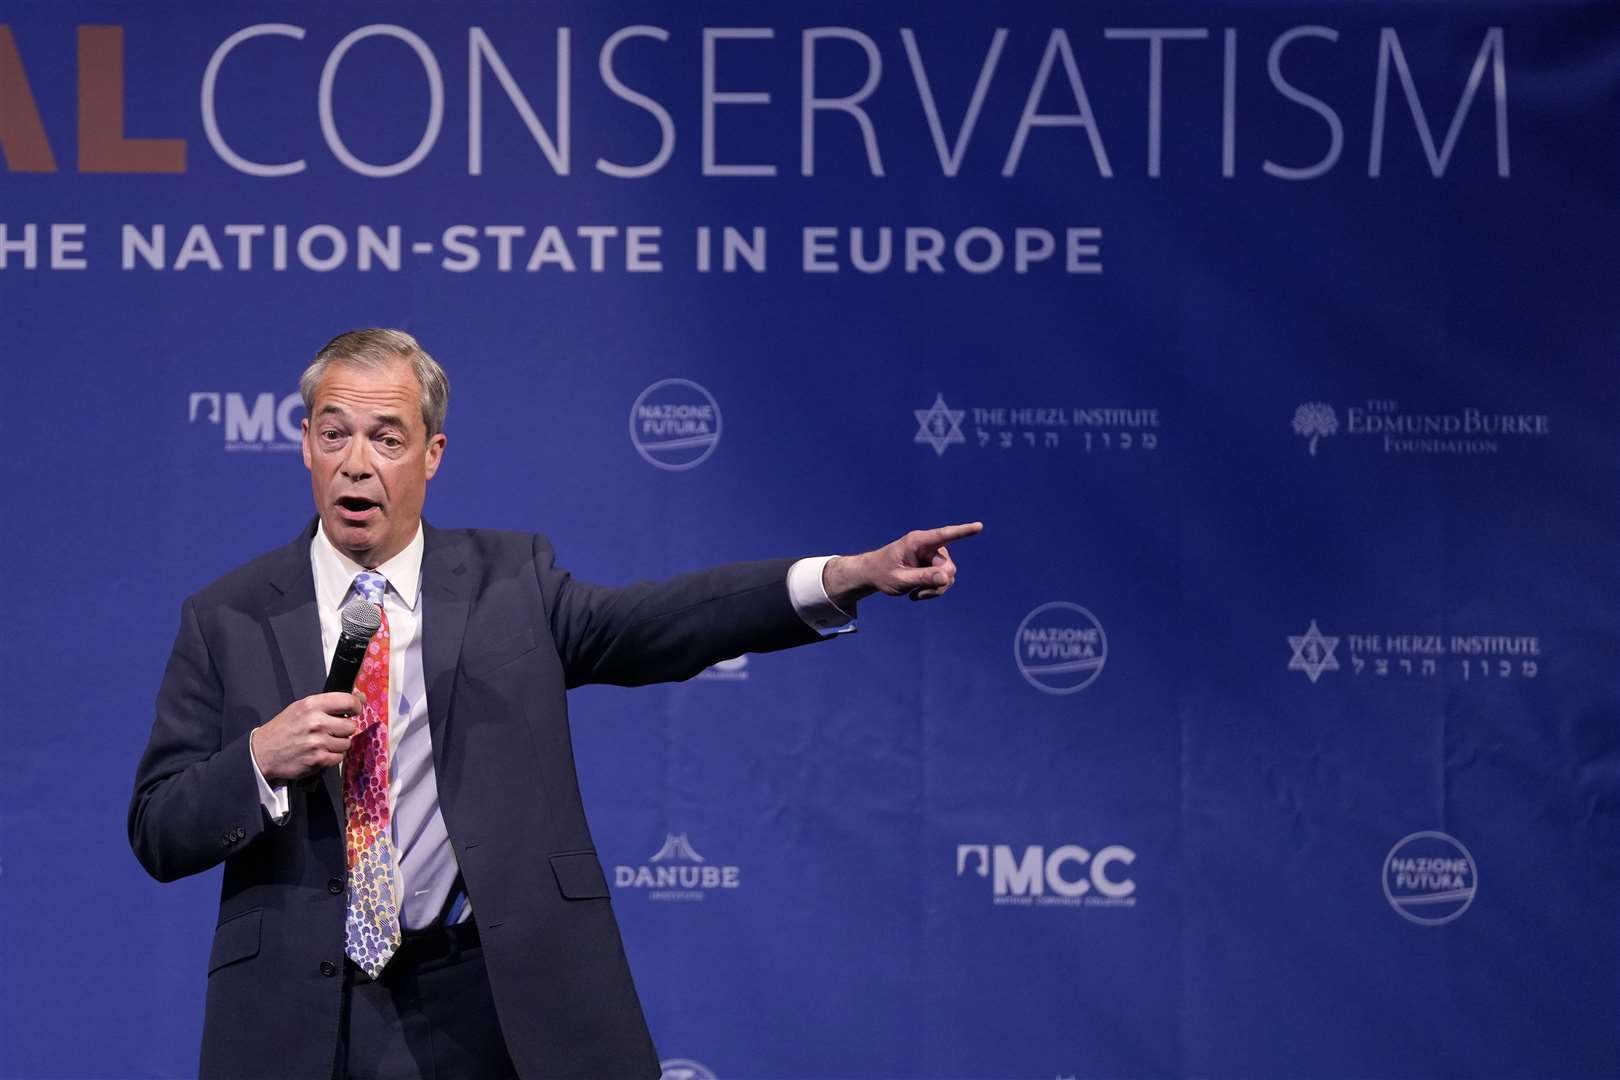 Nigel Farage speaks during the National Conservatism conference in Brussels (Virginia Mayo/AP)